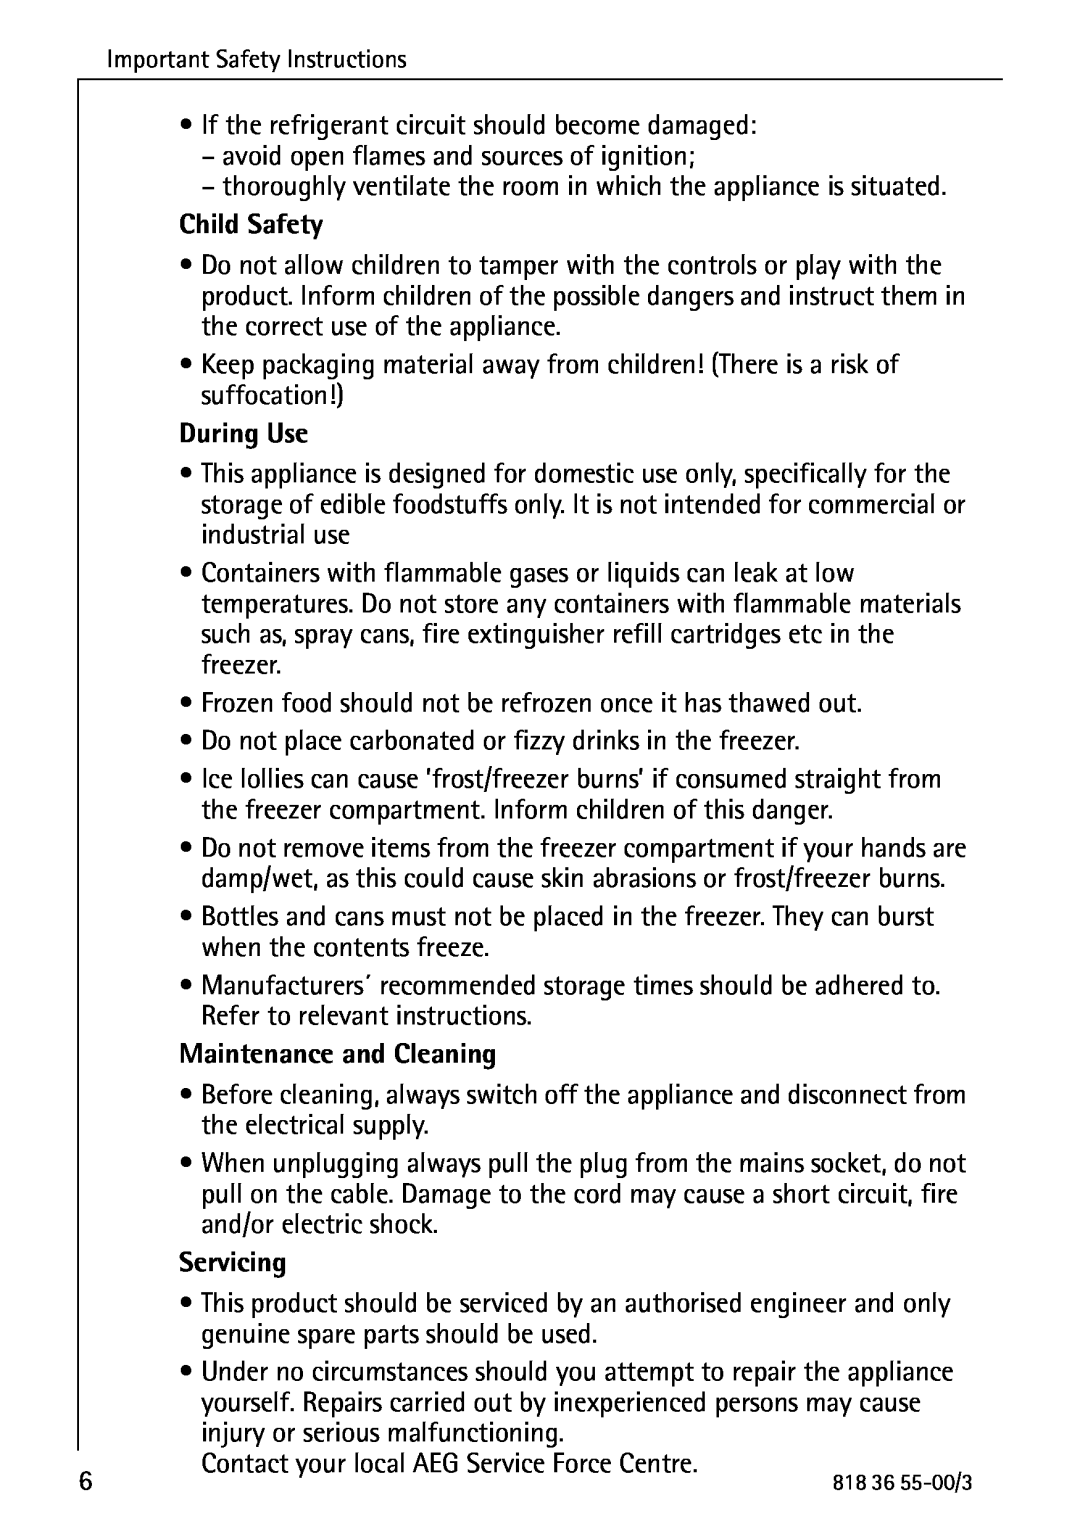 AEG 86378-KG operating instructions Child Safety, During Use, Maintenance and Cleaning, Servicing 